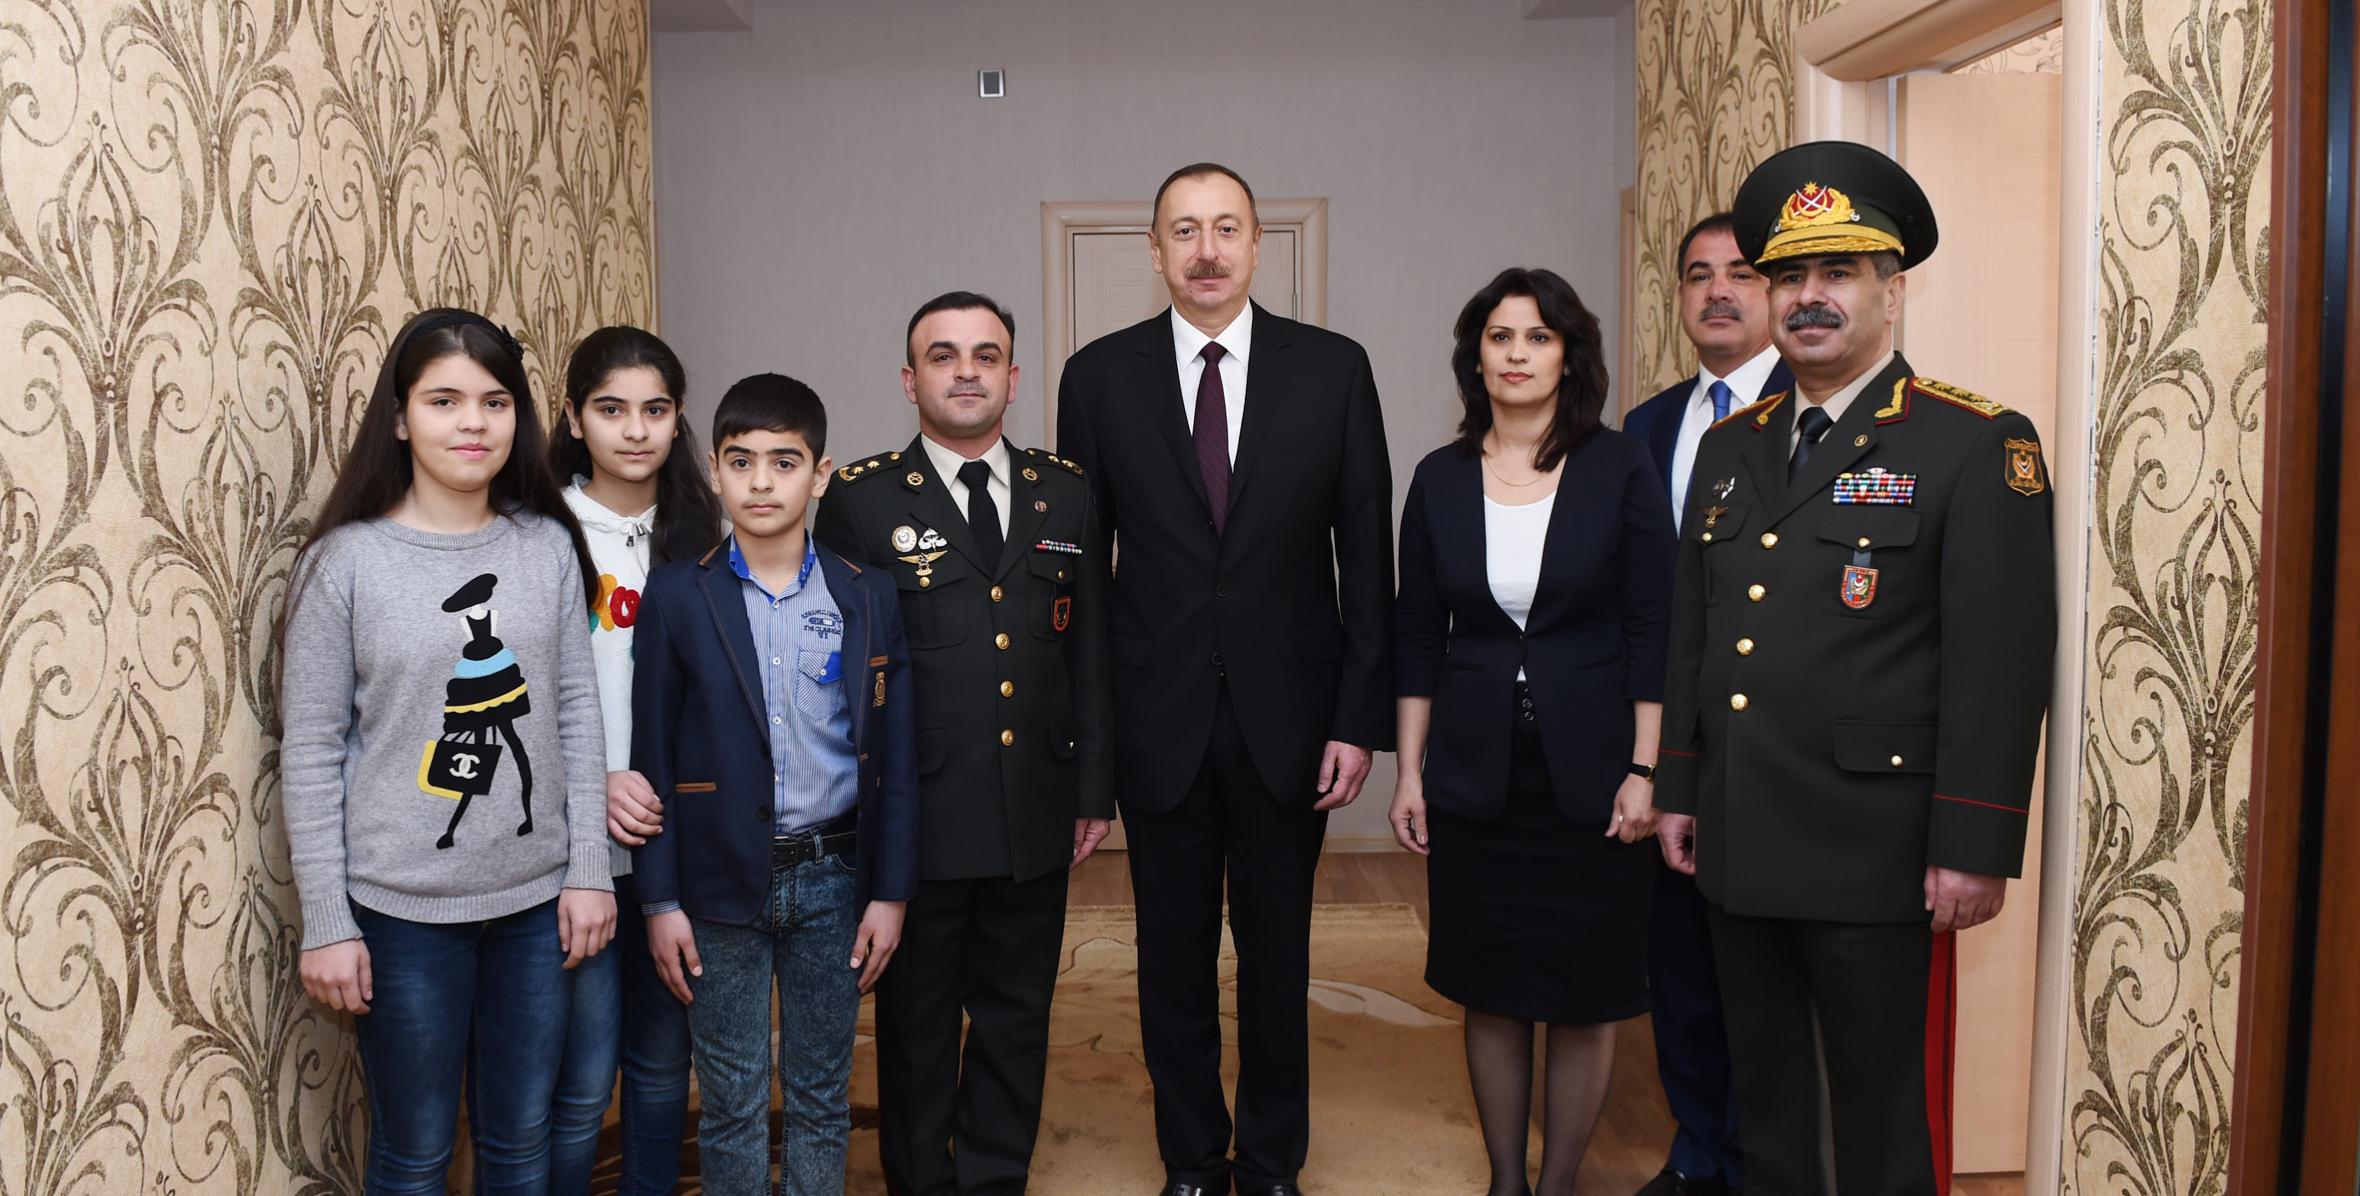 Ilham Aliyev has attended the opening of a military town for servicemen in Ganja